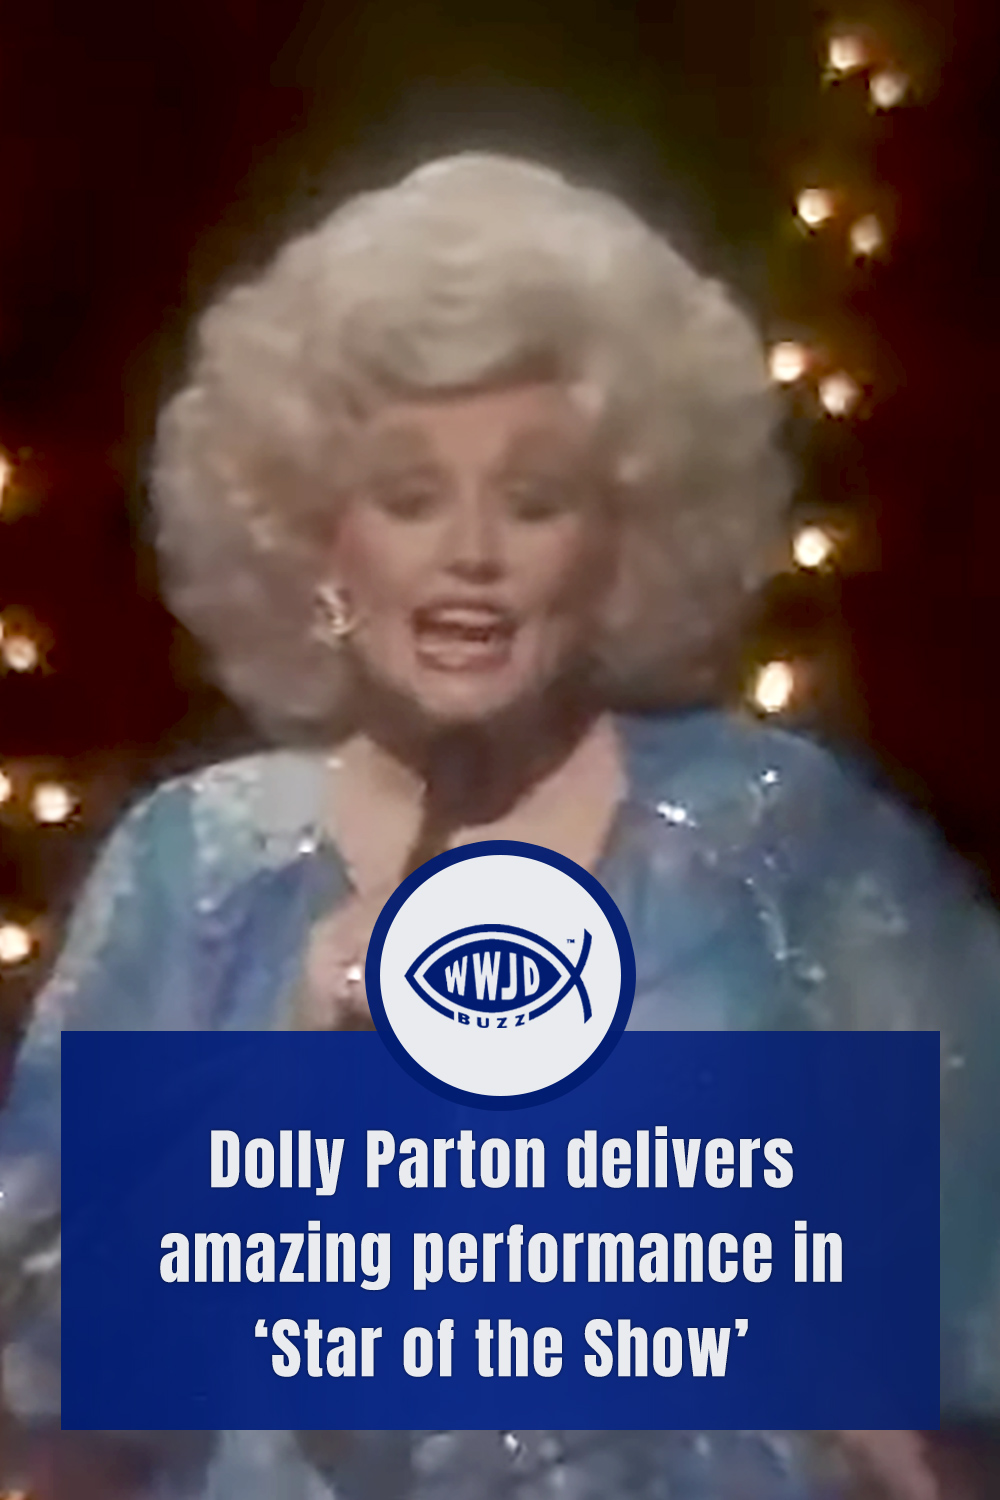 Dolly Parton delivers amazing performance in ‘Star of the Show’